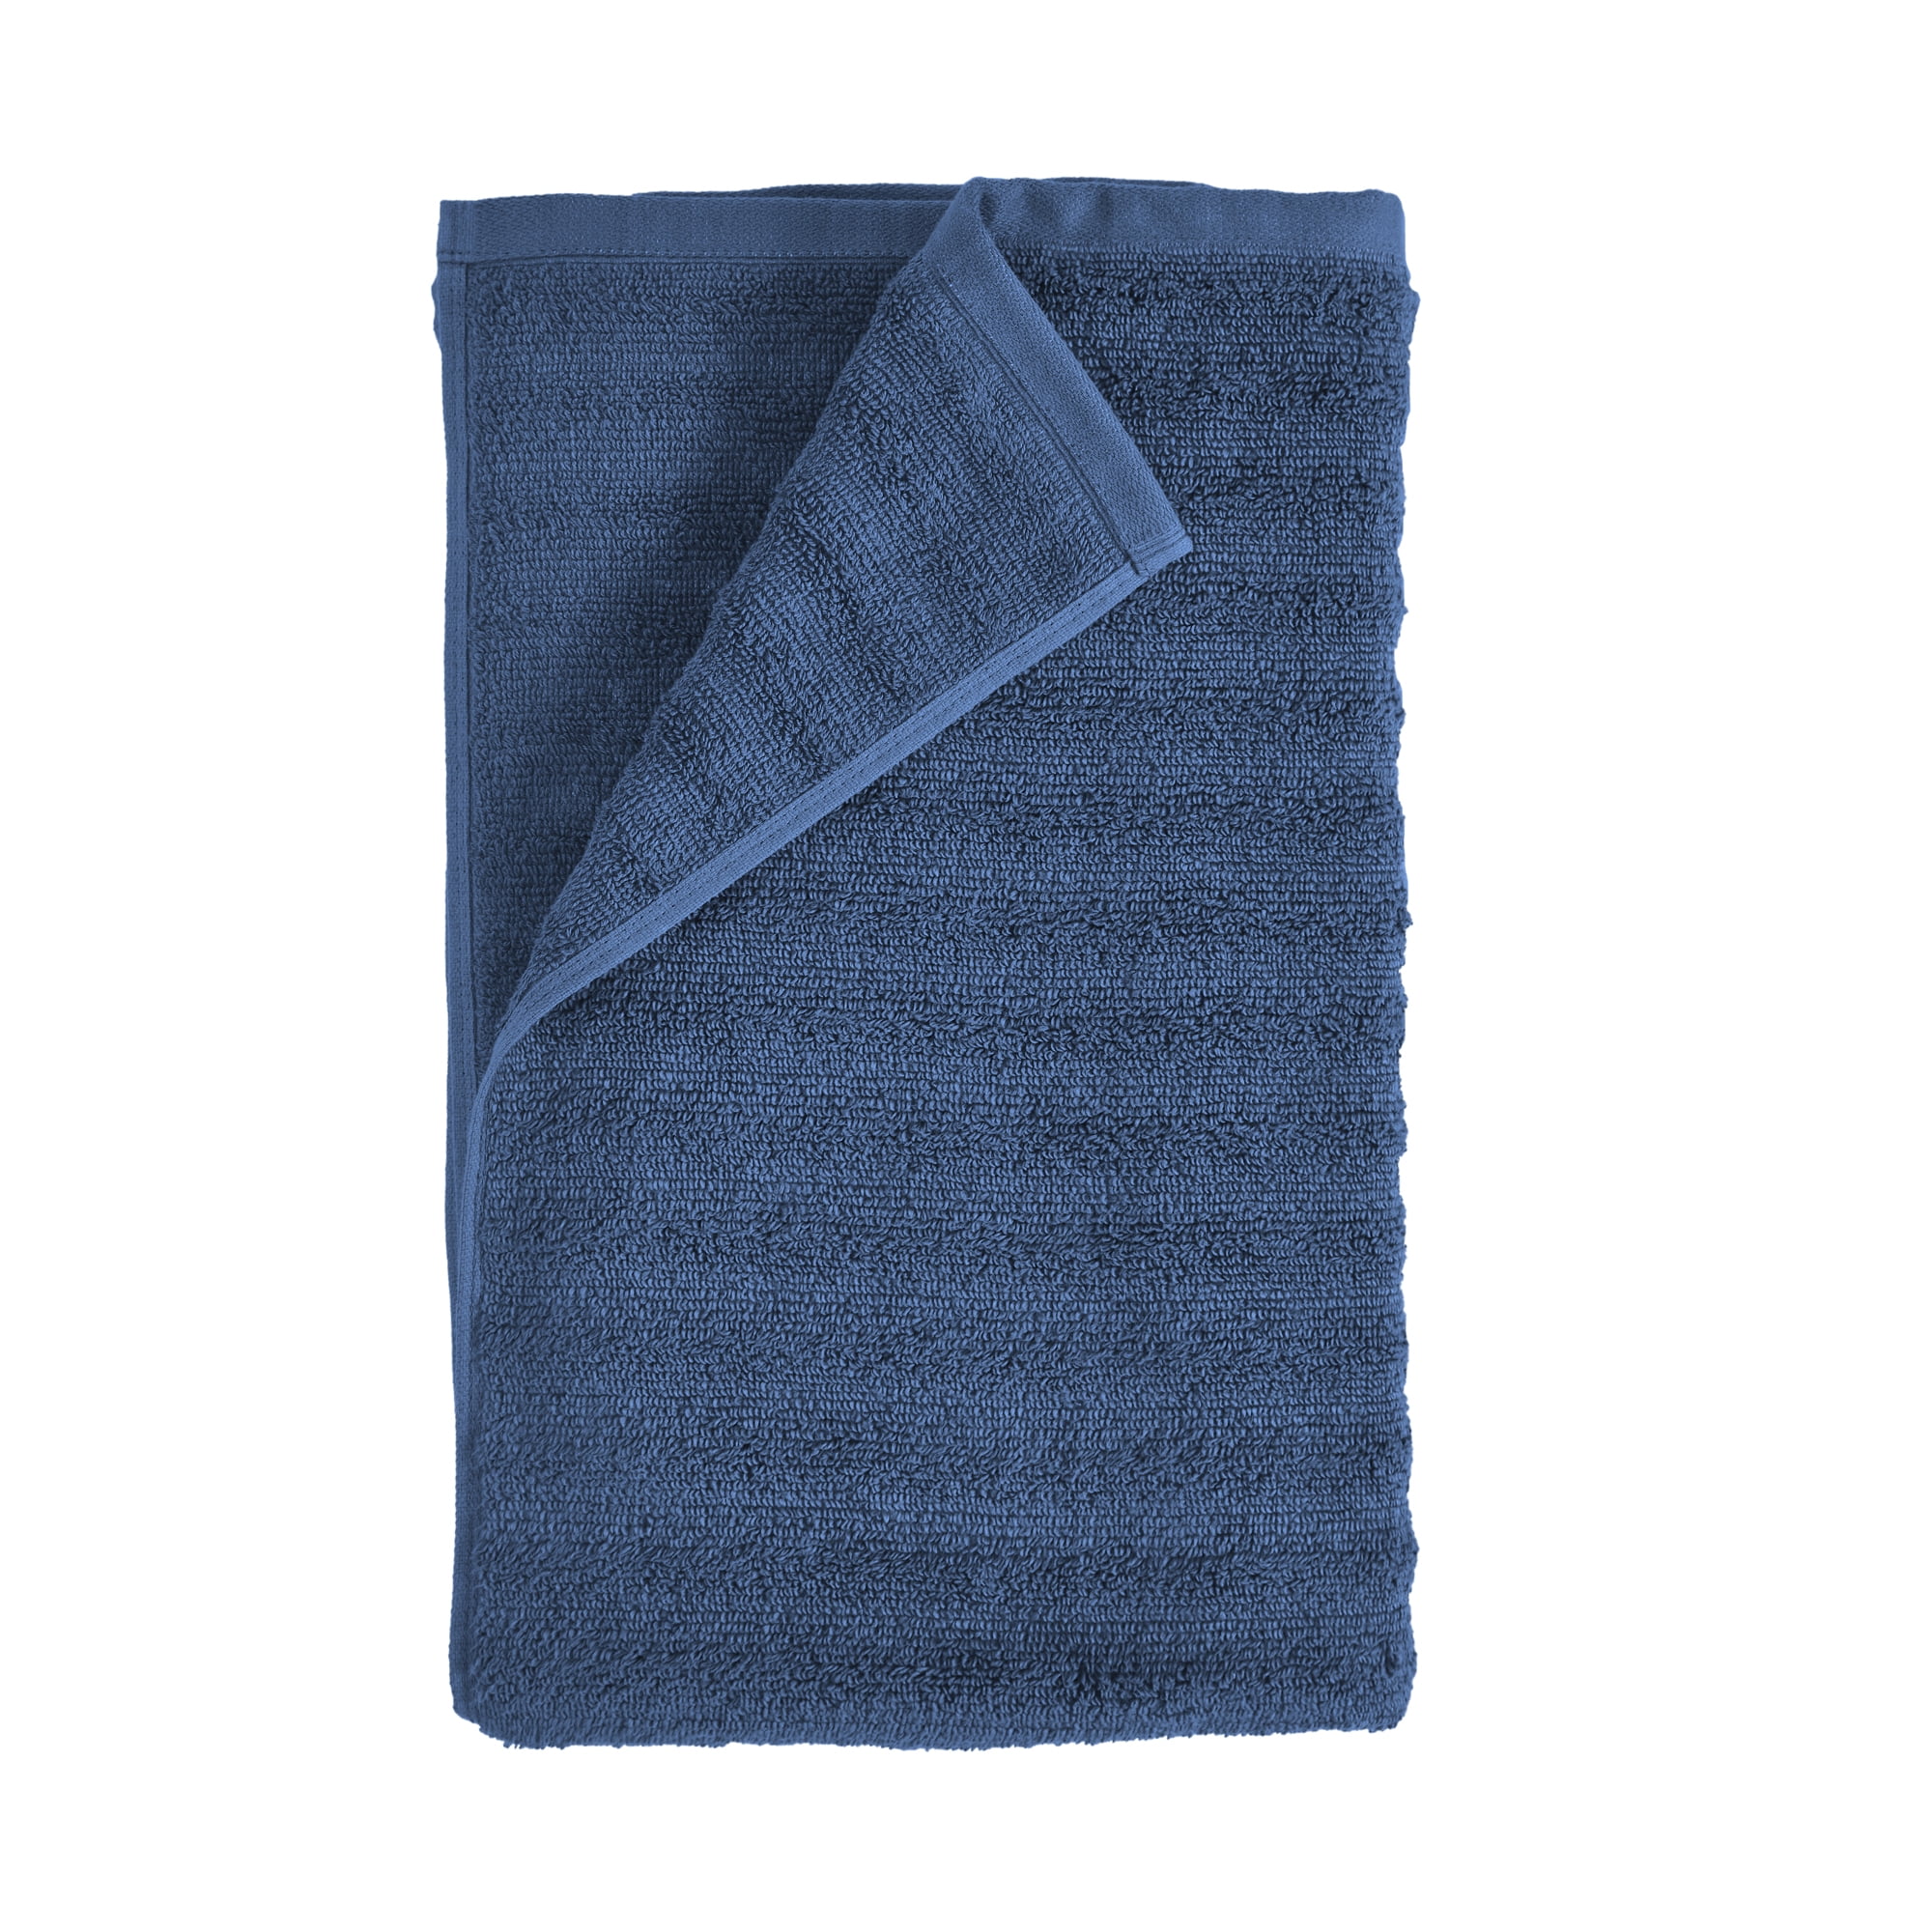 POLYTE Quick Dry Lint Free Microfiber Hand Towel, 16 x 30 in, Set of 4 (Gray)